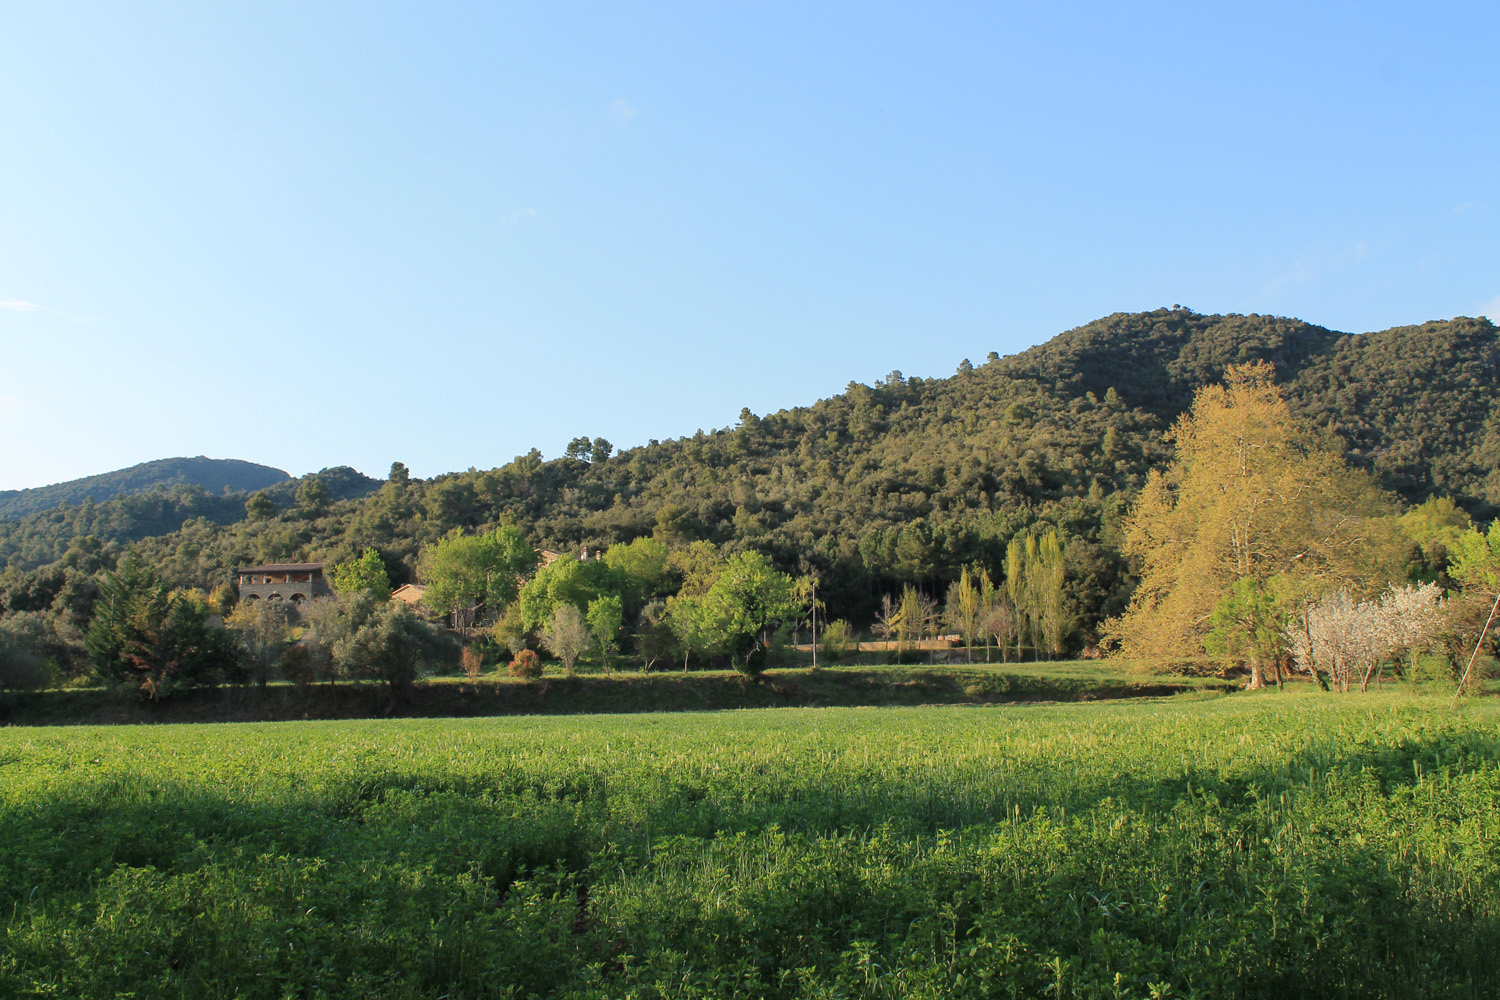 STROLLS AND OUTINGS AROUND THE VALL DEL LLÉMENA